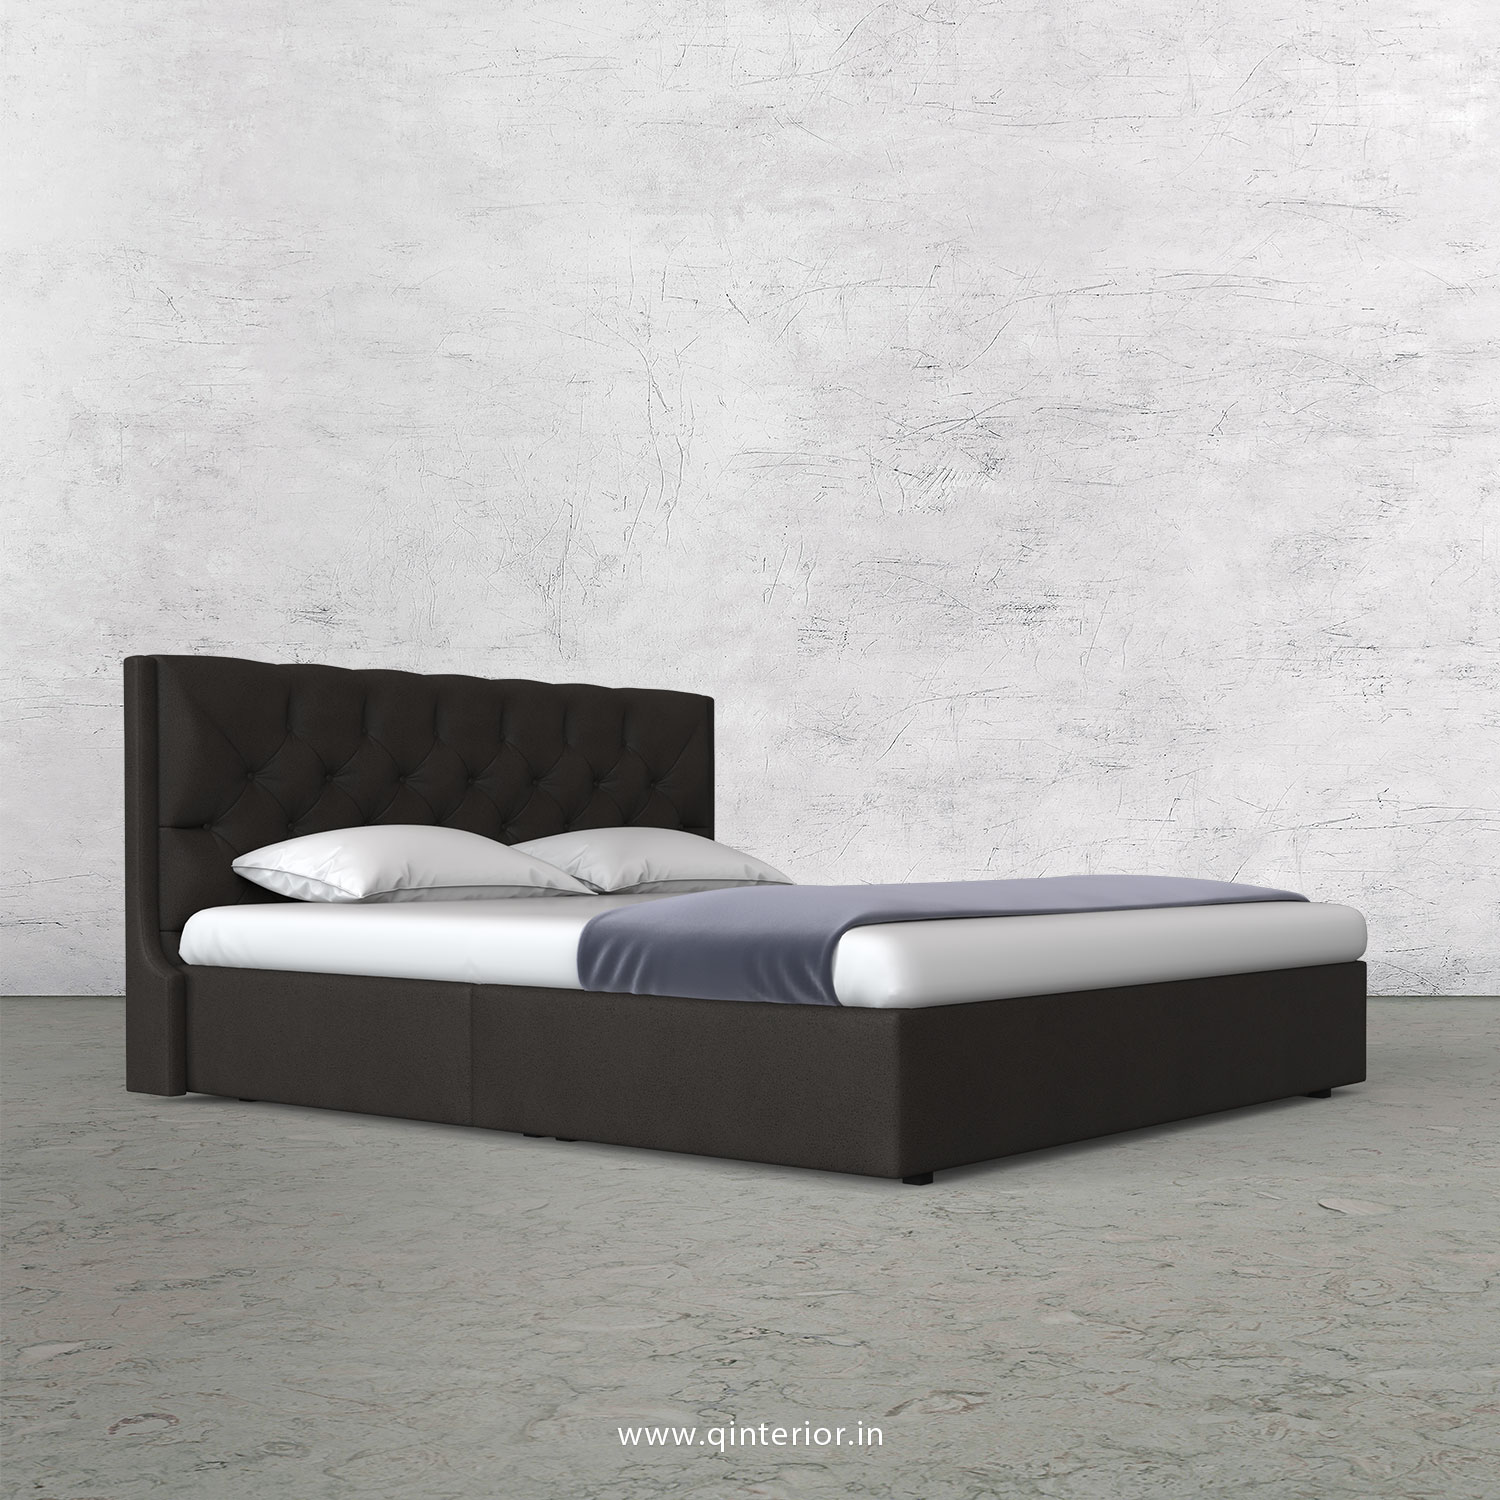 Scorpius Queen Bed in Fab Leather Fabric - QBD009 FL15